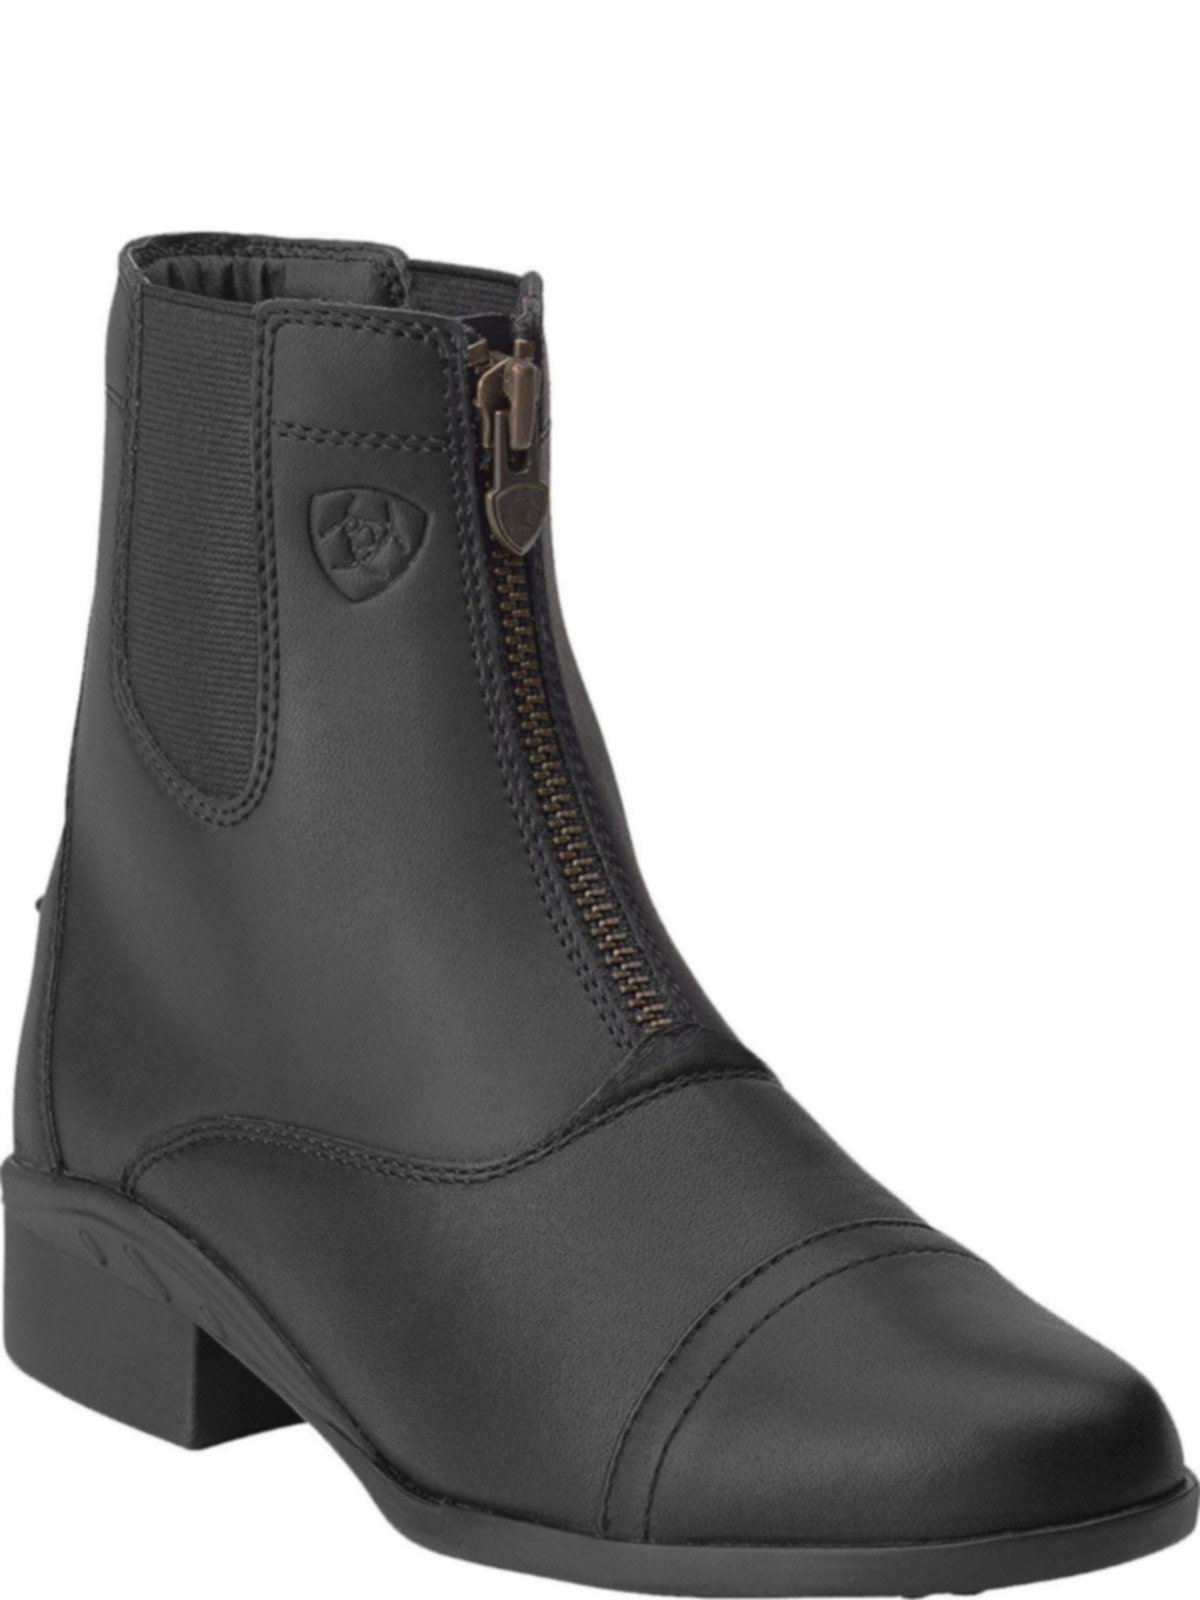 Shop Ariat Womens Scout Zip Paddock Equestrian Boot 10012741 | Save 25% ...